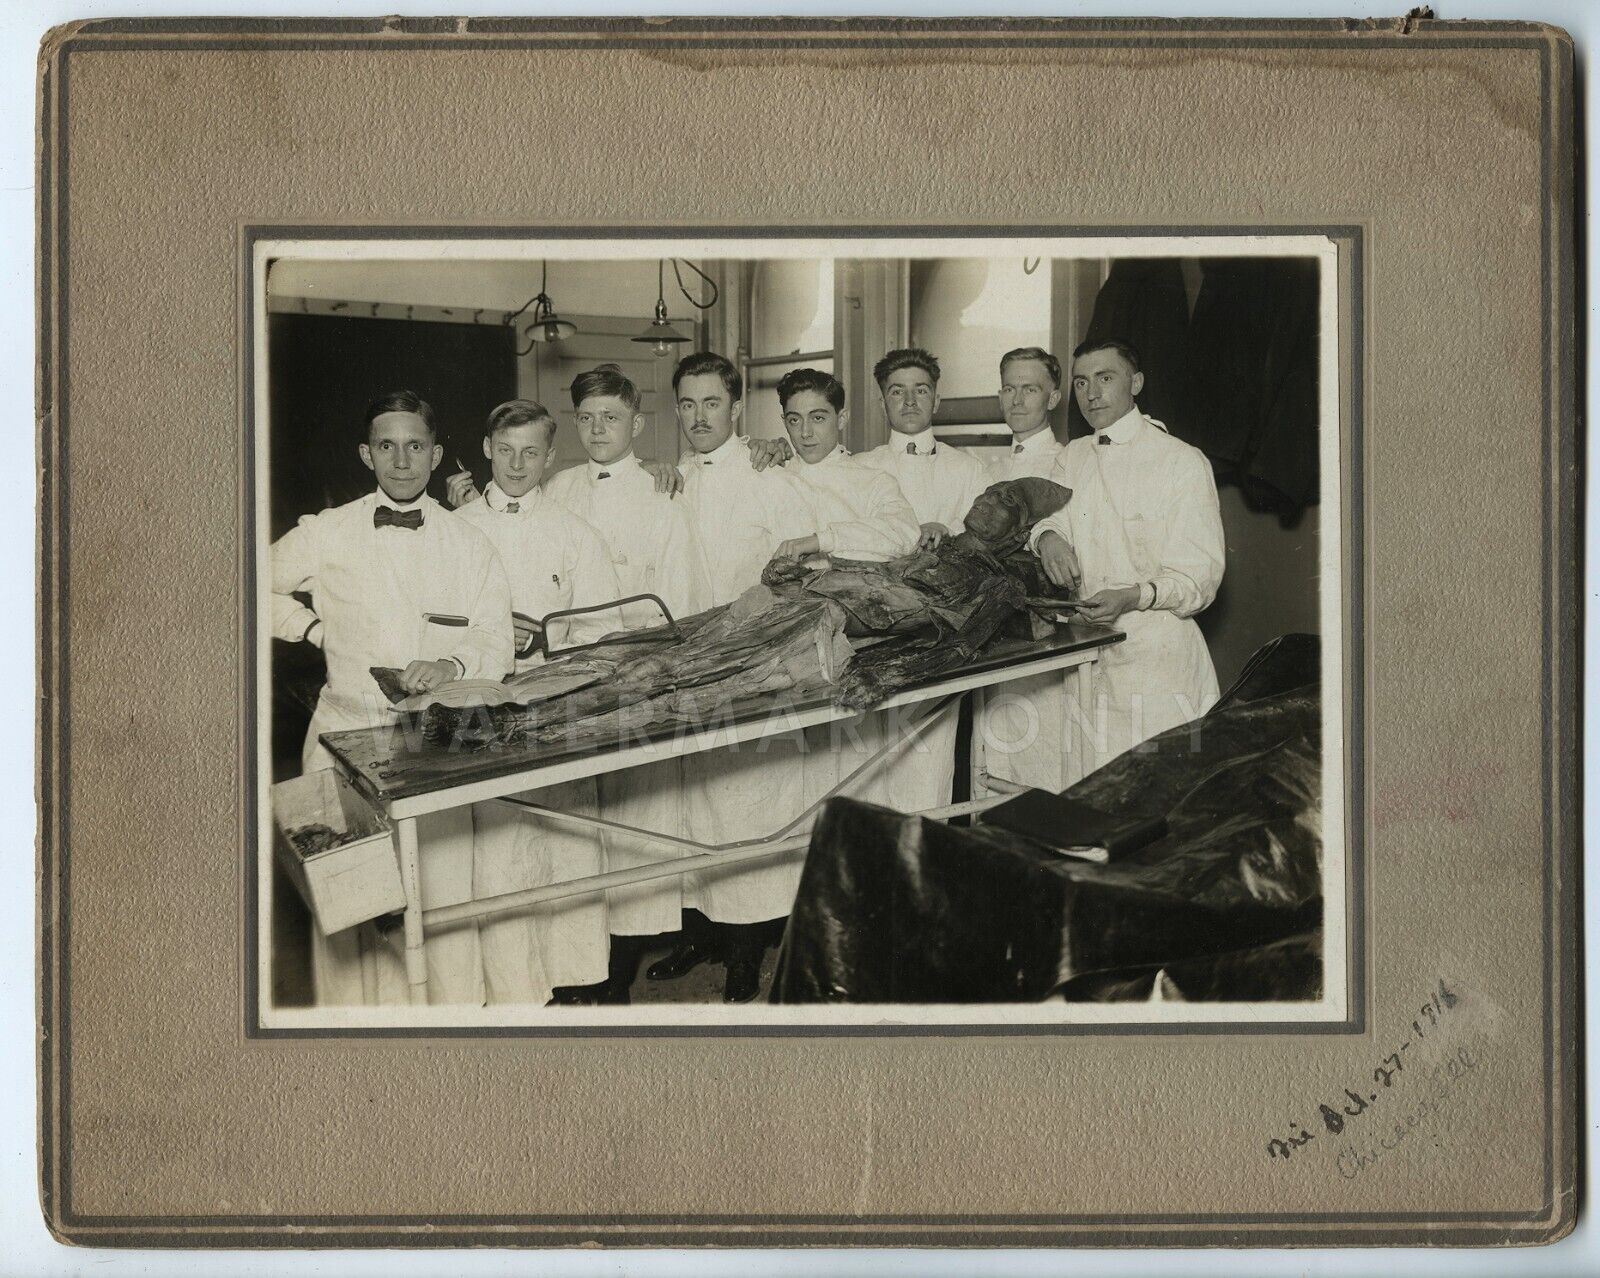 ANTIQUE DATED 1916 ANATOMY STUDENTS & DEAD BODY CHICAGO ILLINOIS MEDICAL SCHOOL